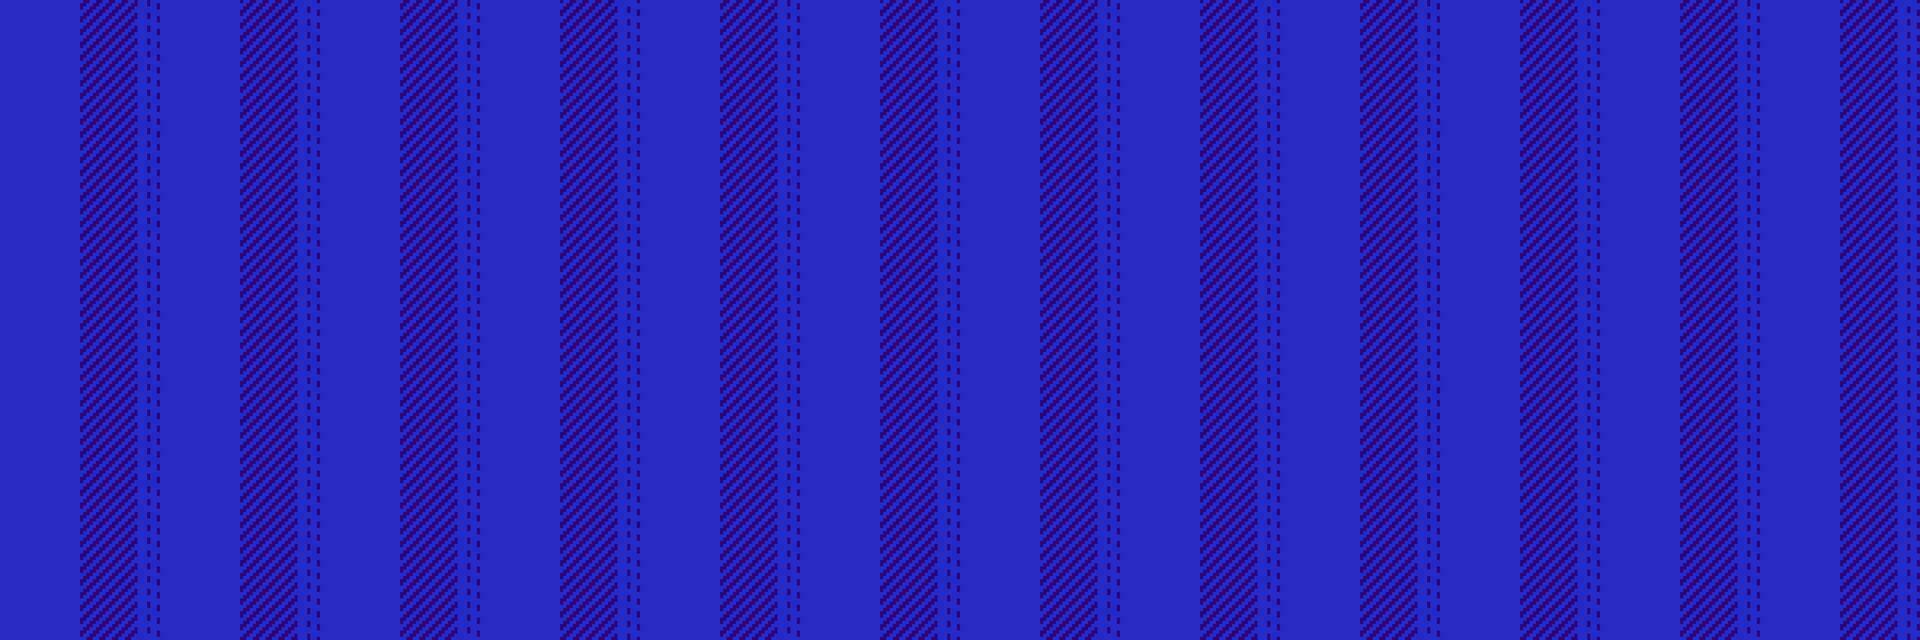 Decorate pattern texture background, children vector lines seamless. Effect fabric vertical stripe textile in blue and violet colors.